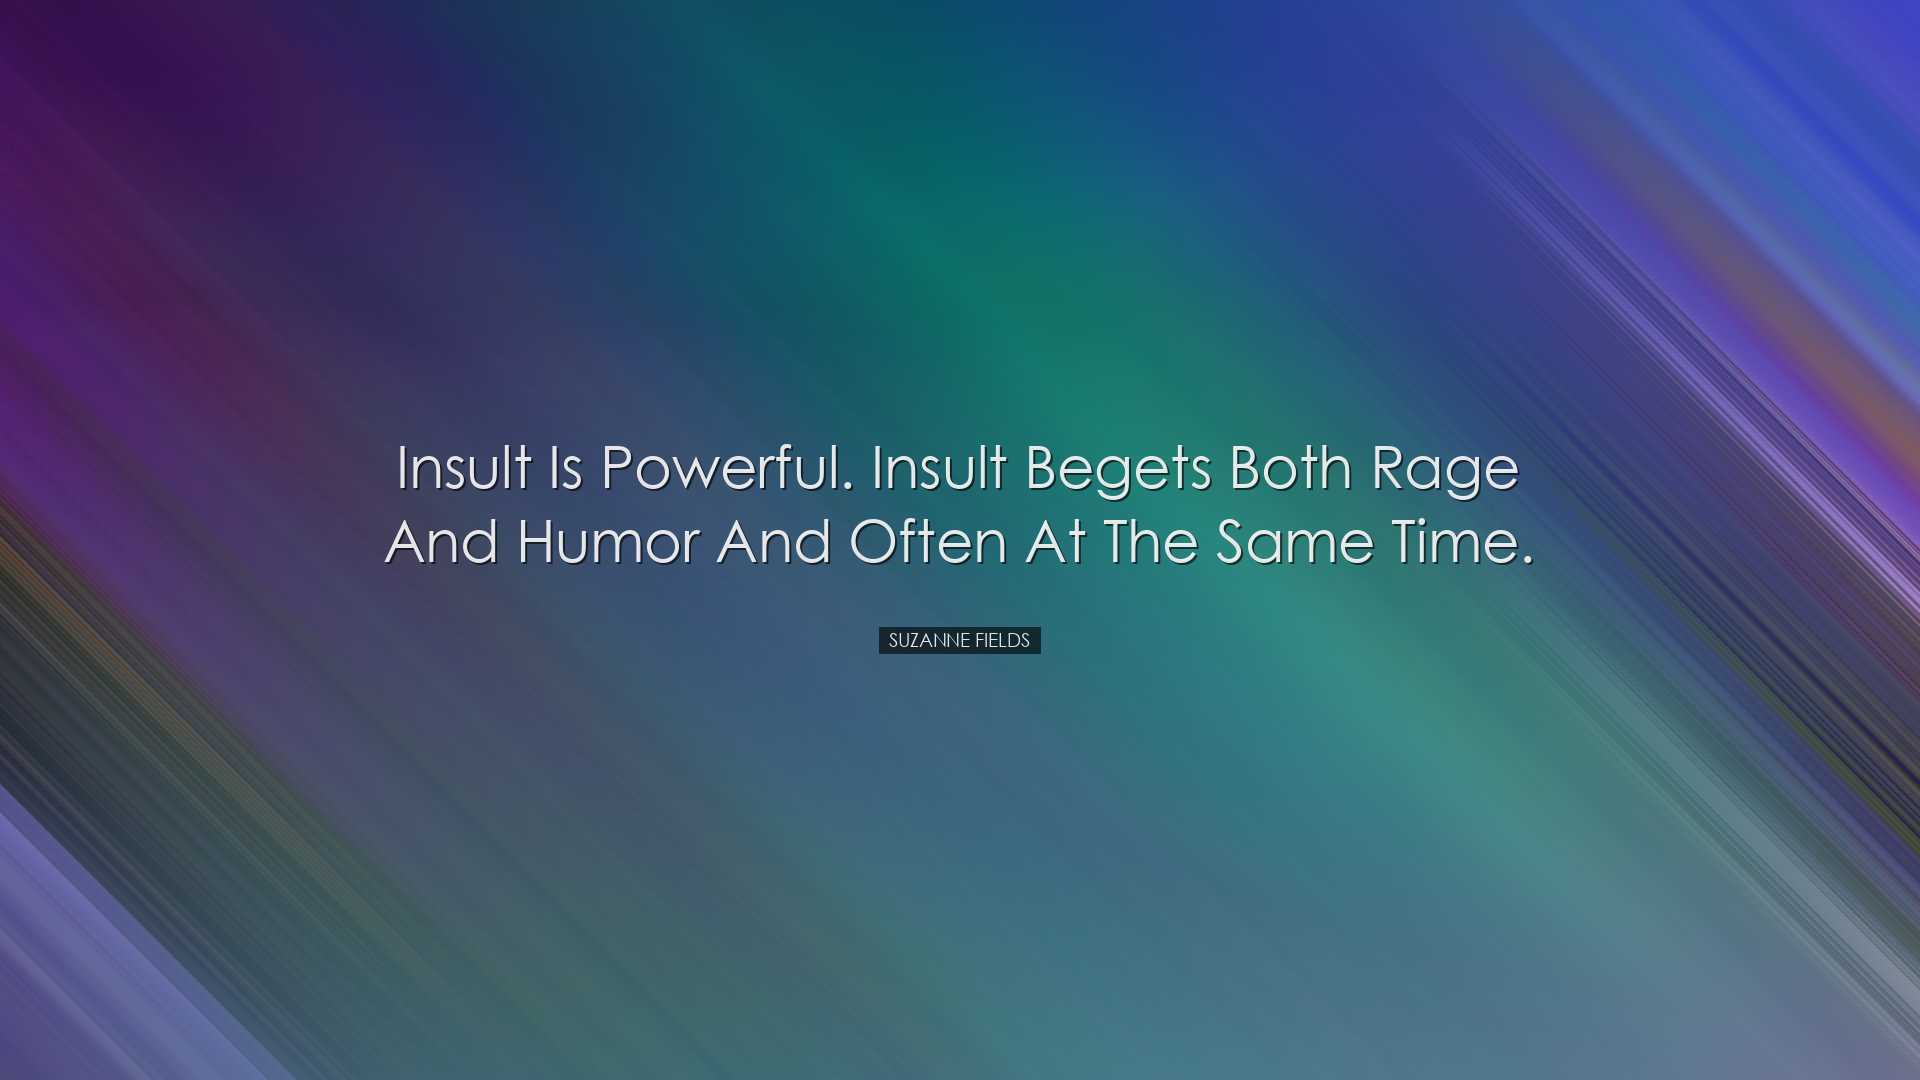 Insult is powerful. Insult begets both rage and humor and often at